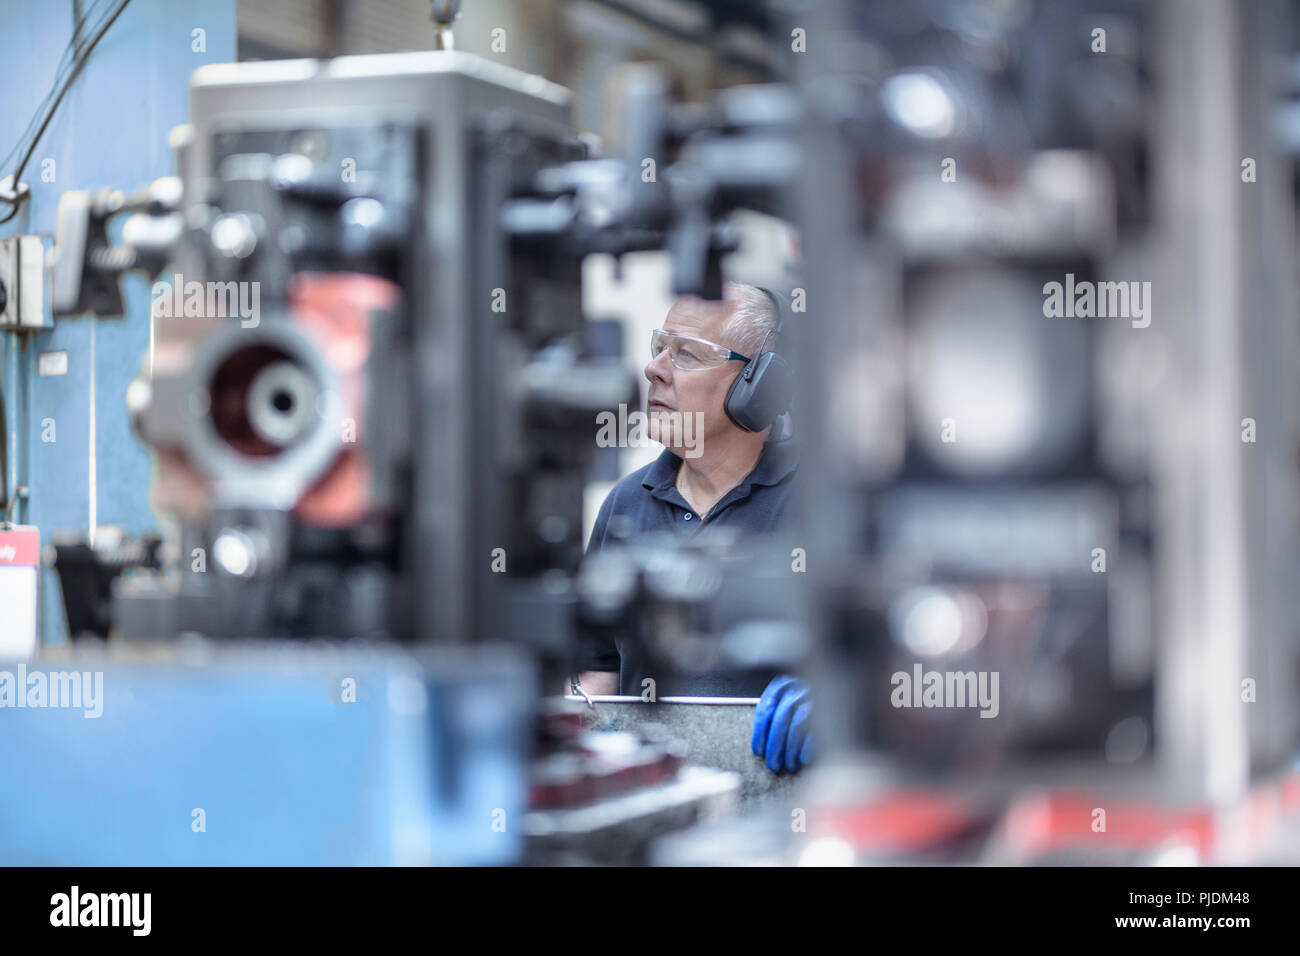 Engineer operating machine in gearbox factory Stock Photo